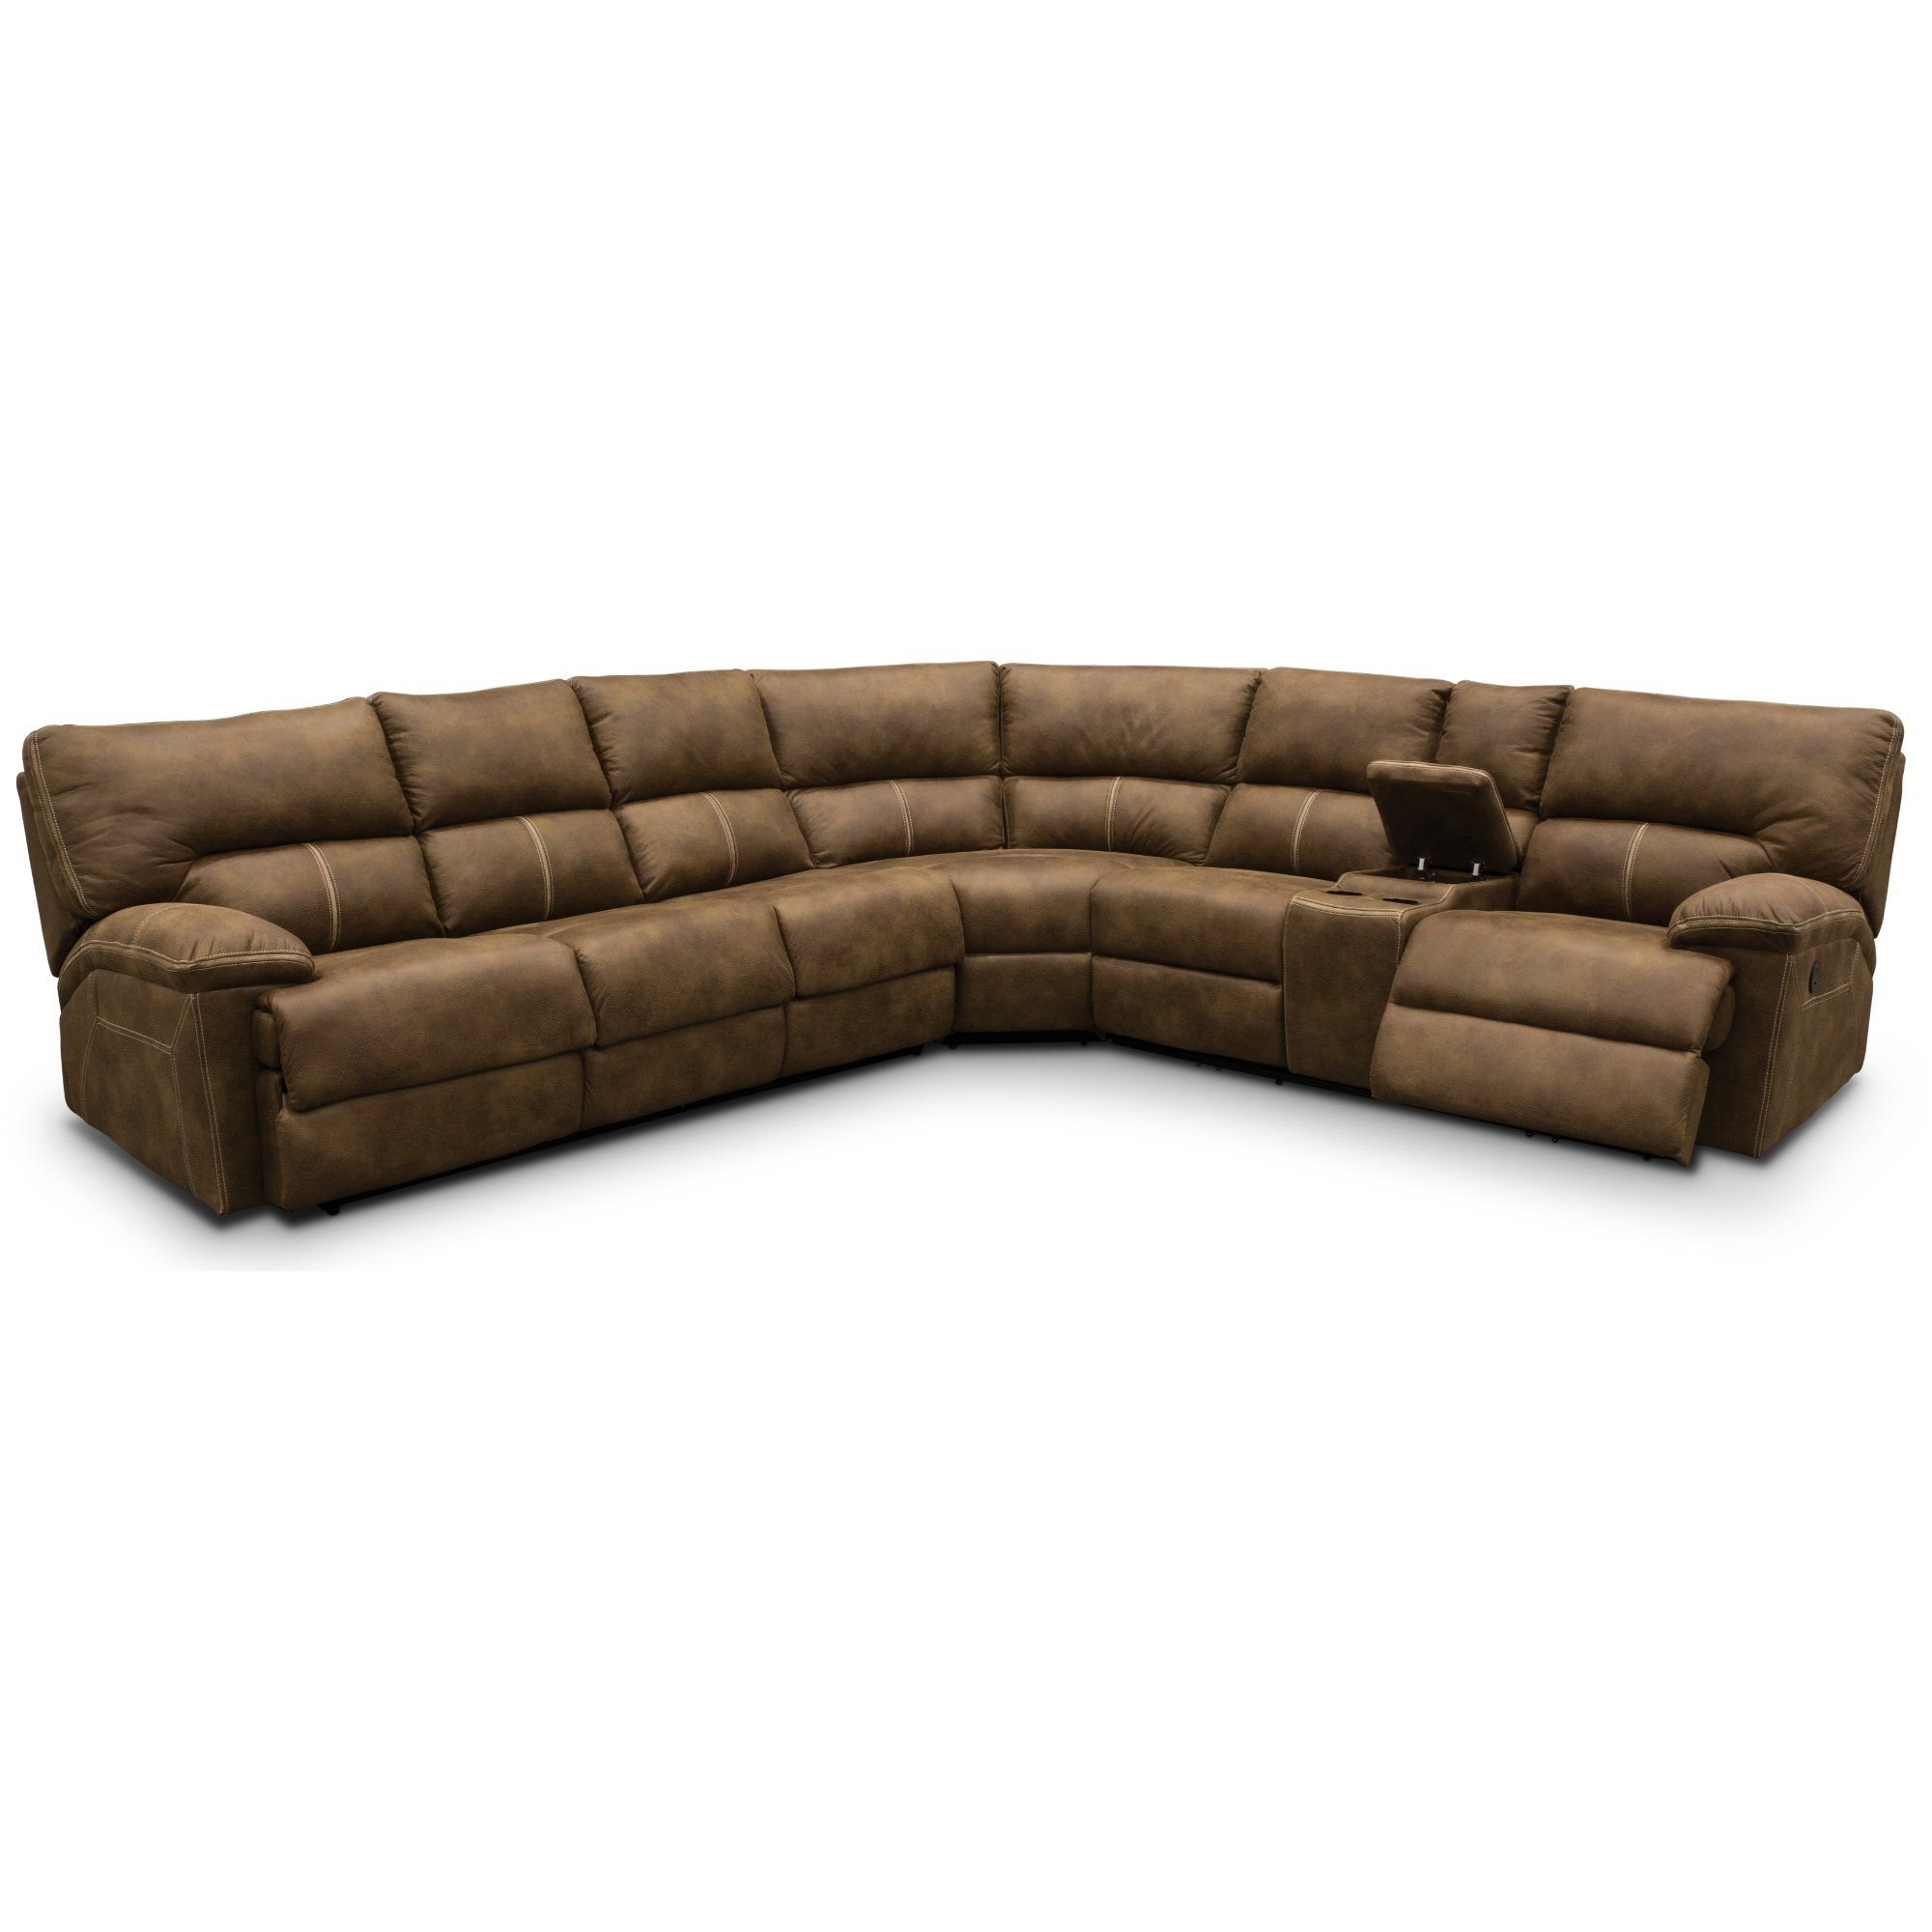 3 Piece Sectional Sofa With Recliner | Thesofasite (View 4 of 30)